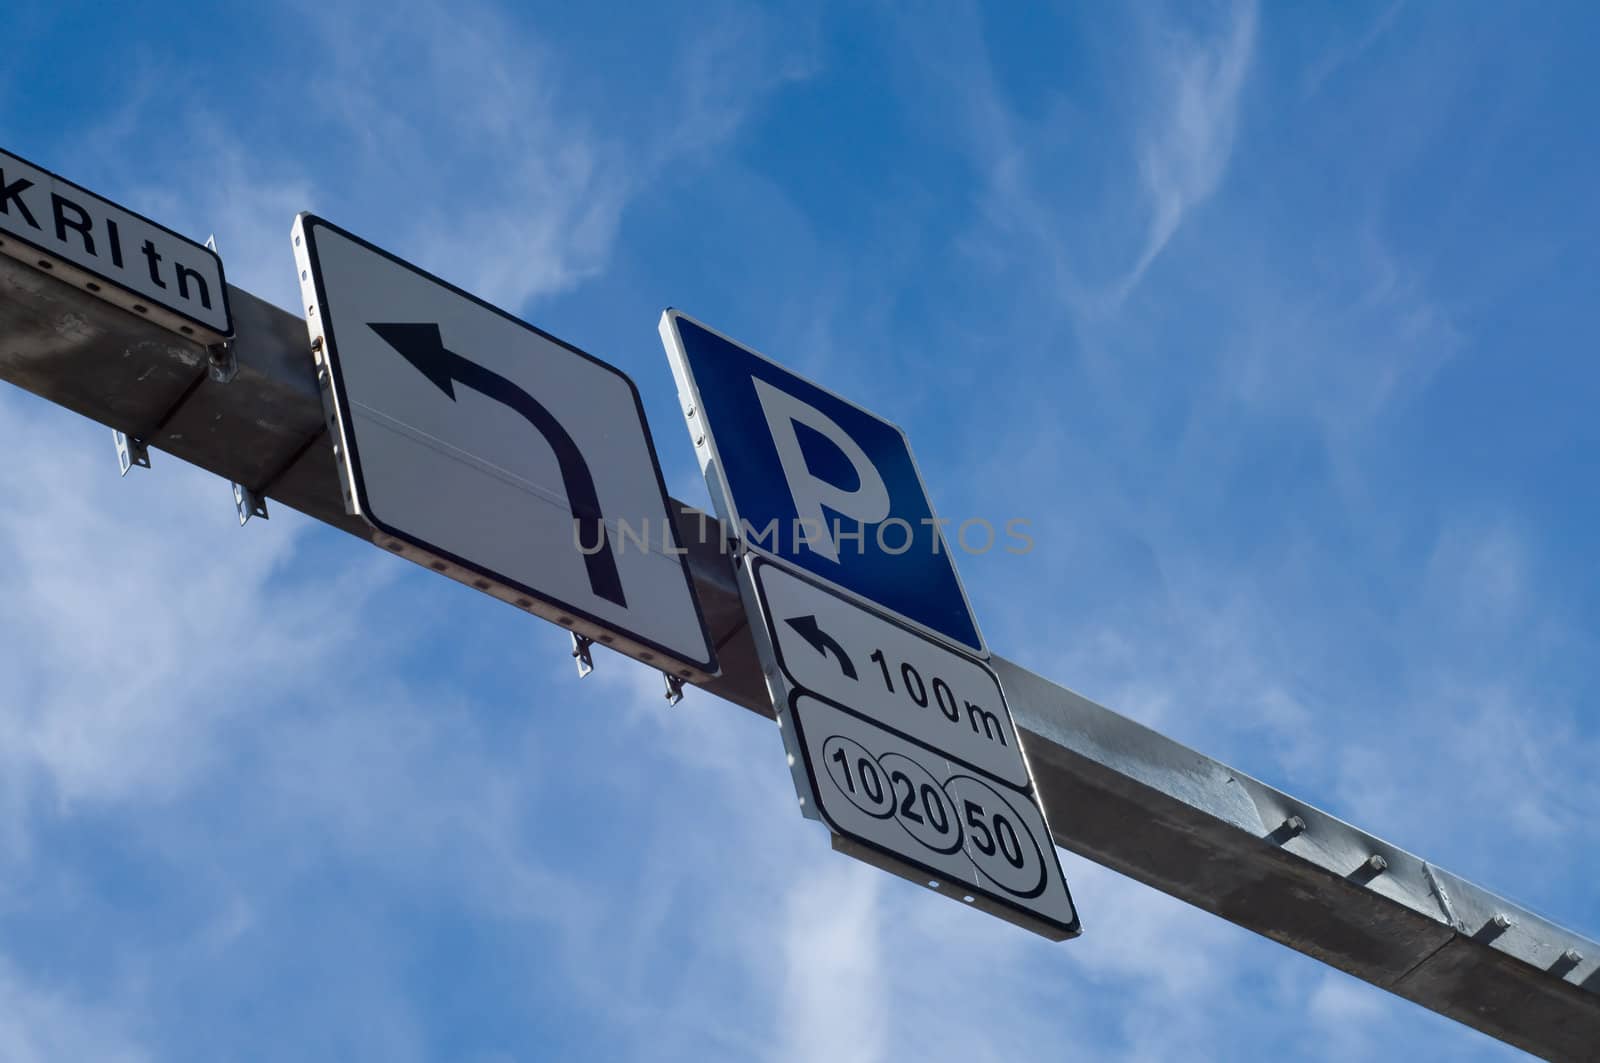 Shot of road signs, blue sky, downtown